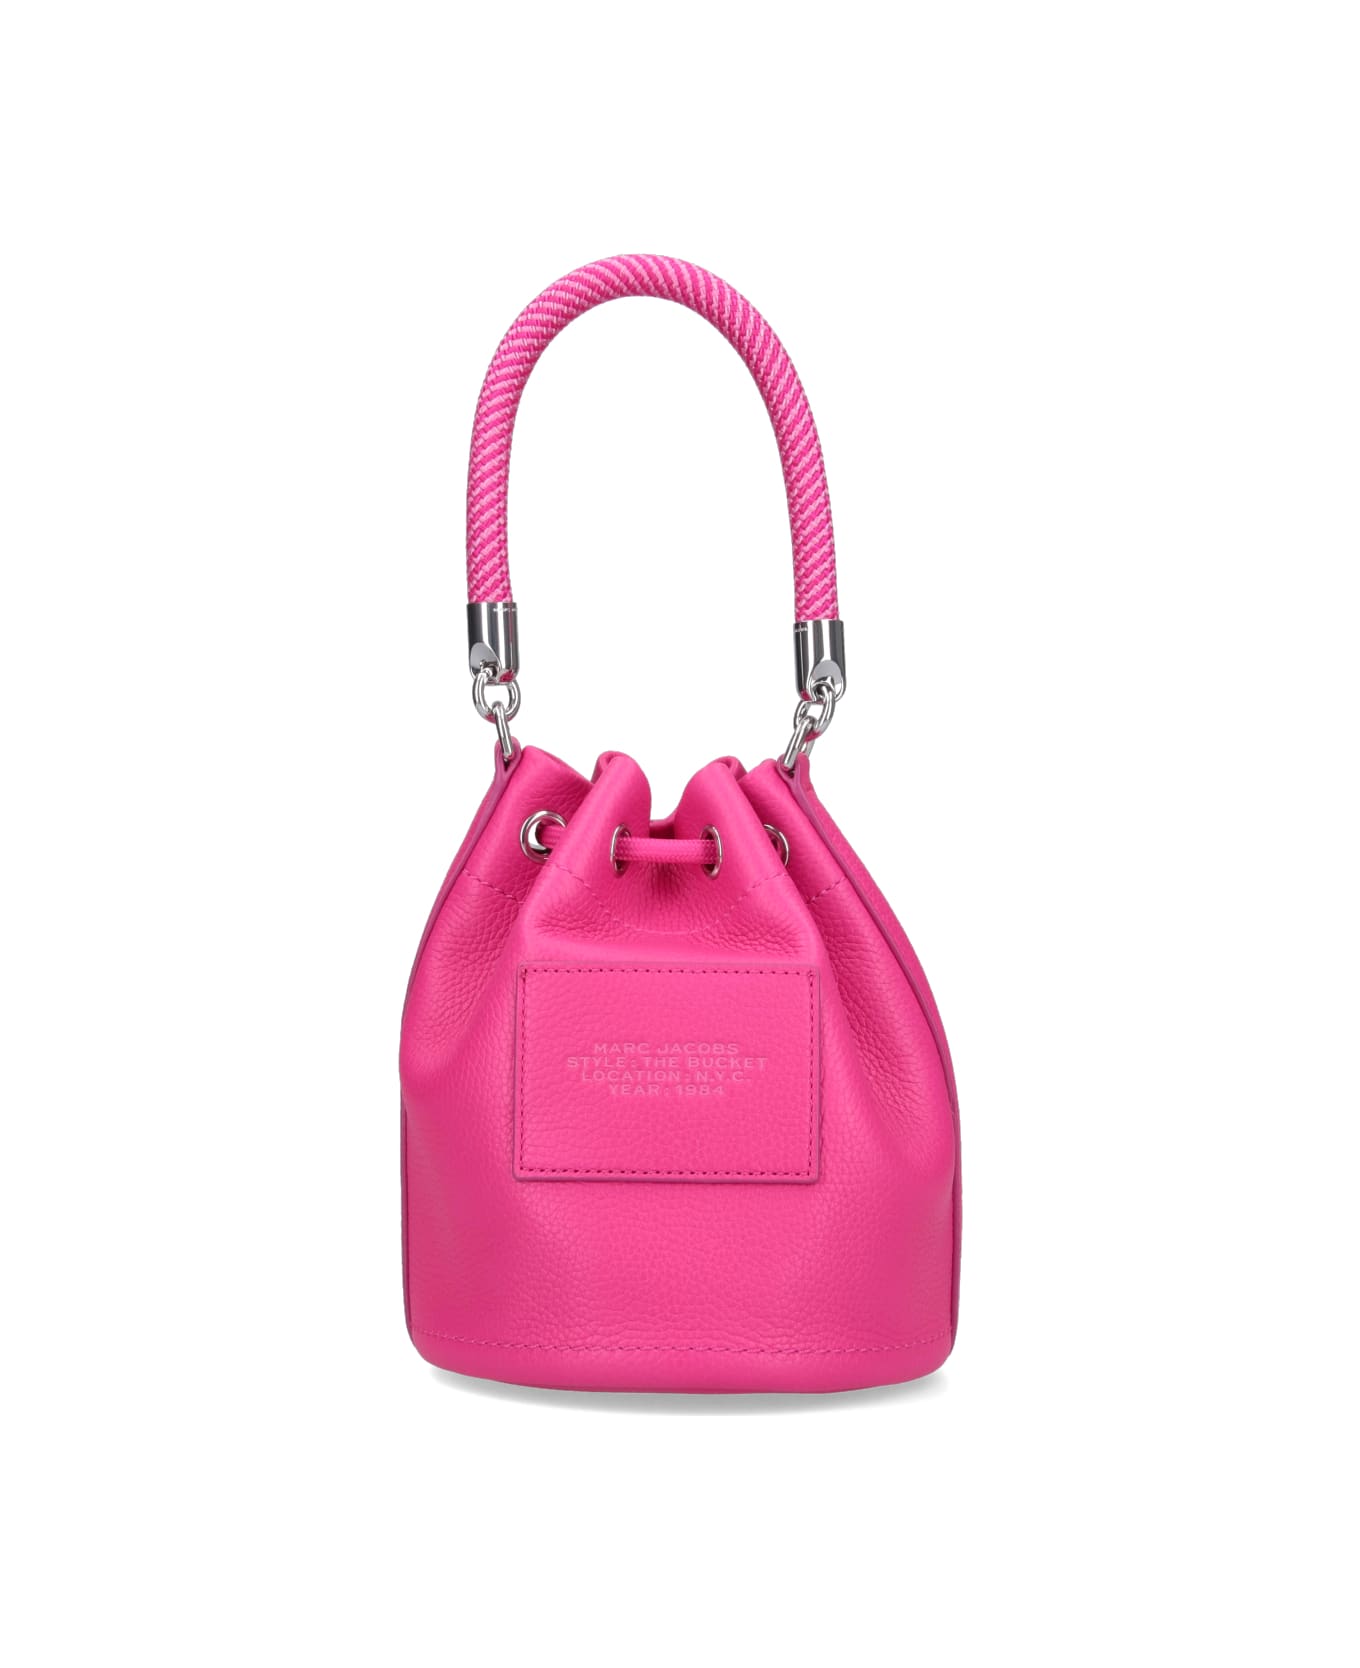 Marc Jacobs "the Leather Bucket" Bag - Pink